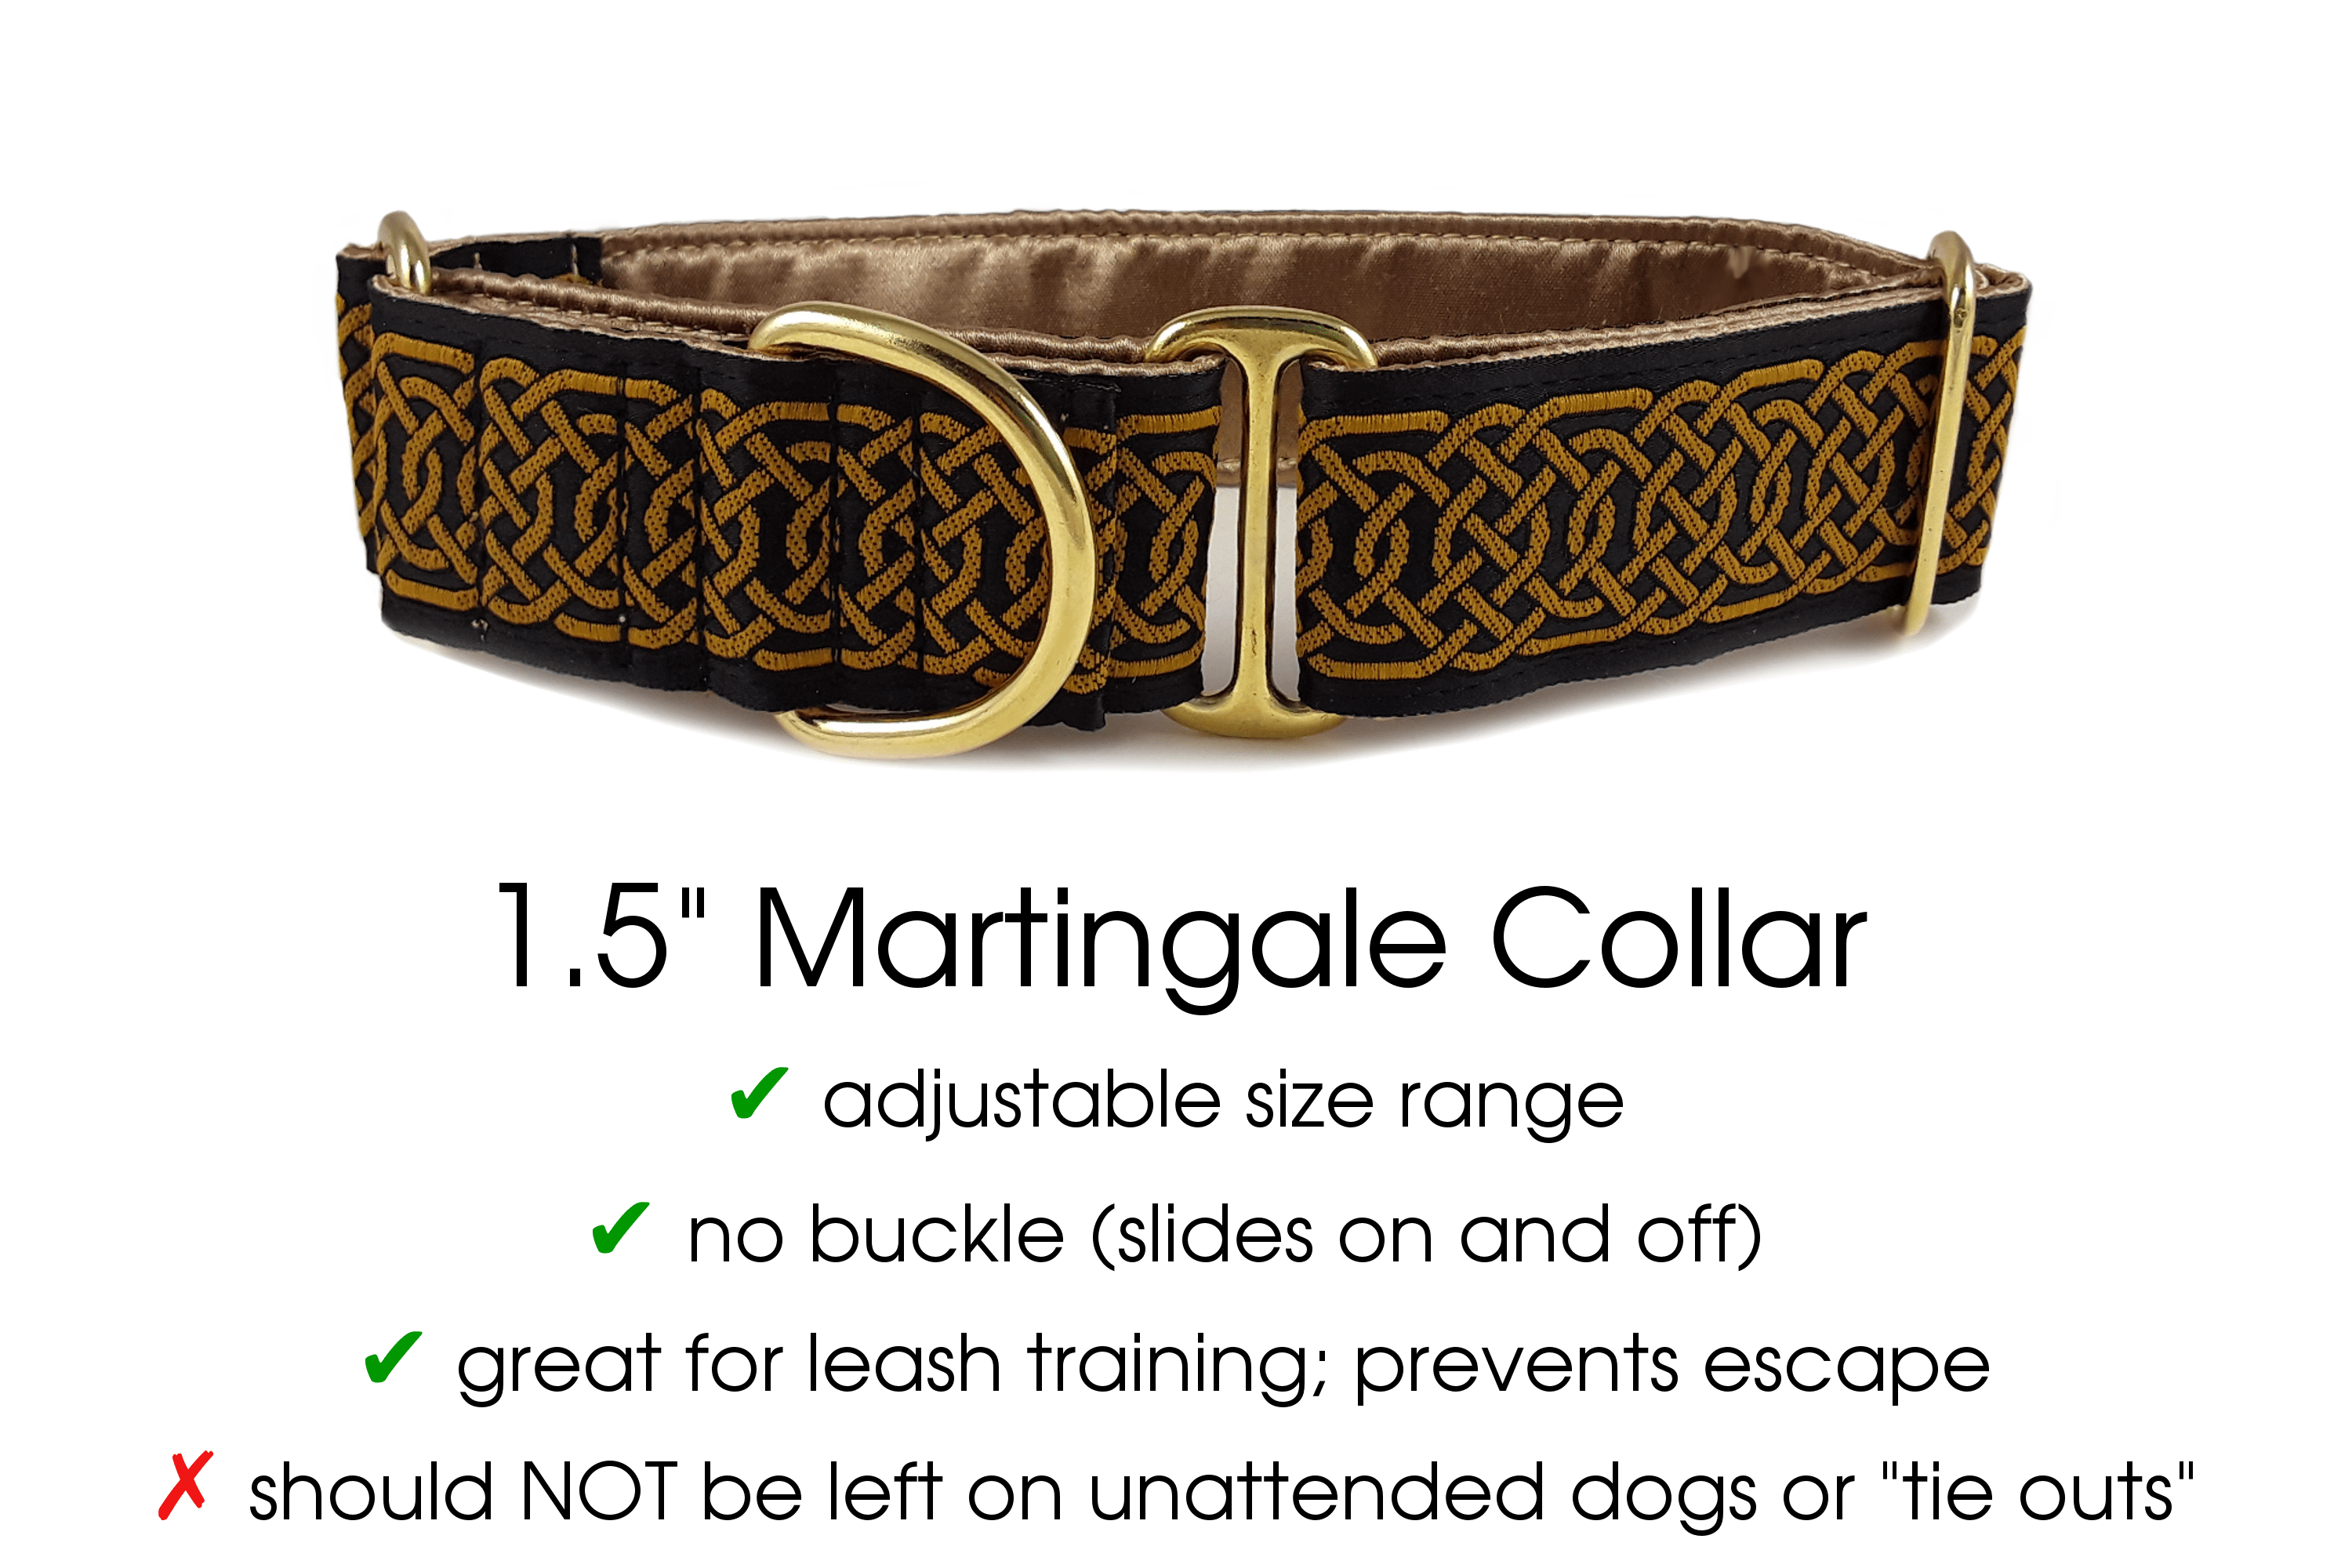 Wexford Jacquard in Gold & Black - Martingale Dog Collar or Buckle Dog Collar - 1.5" Width - The Hound Haberdashery